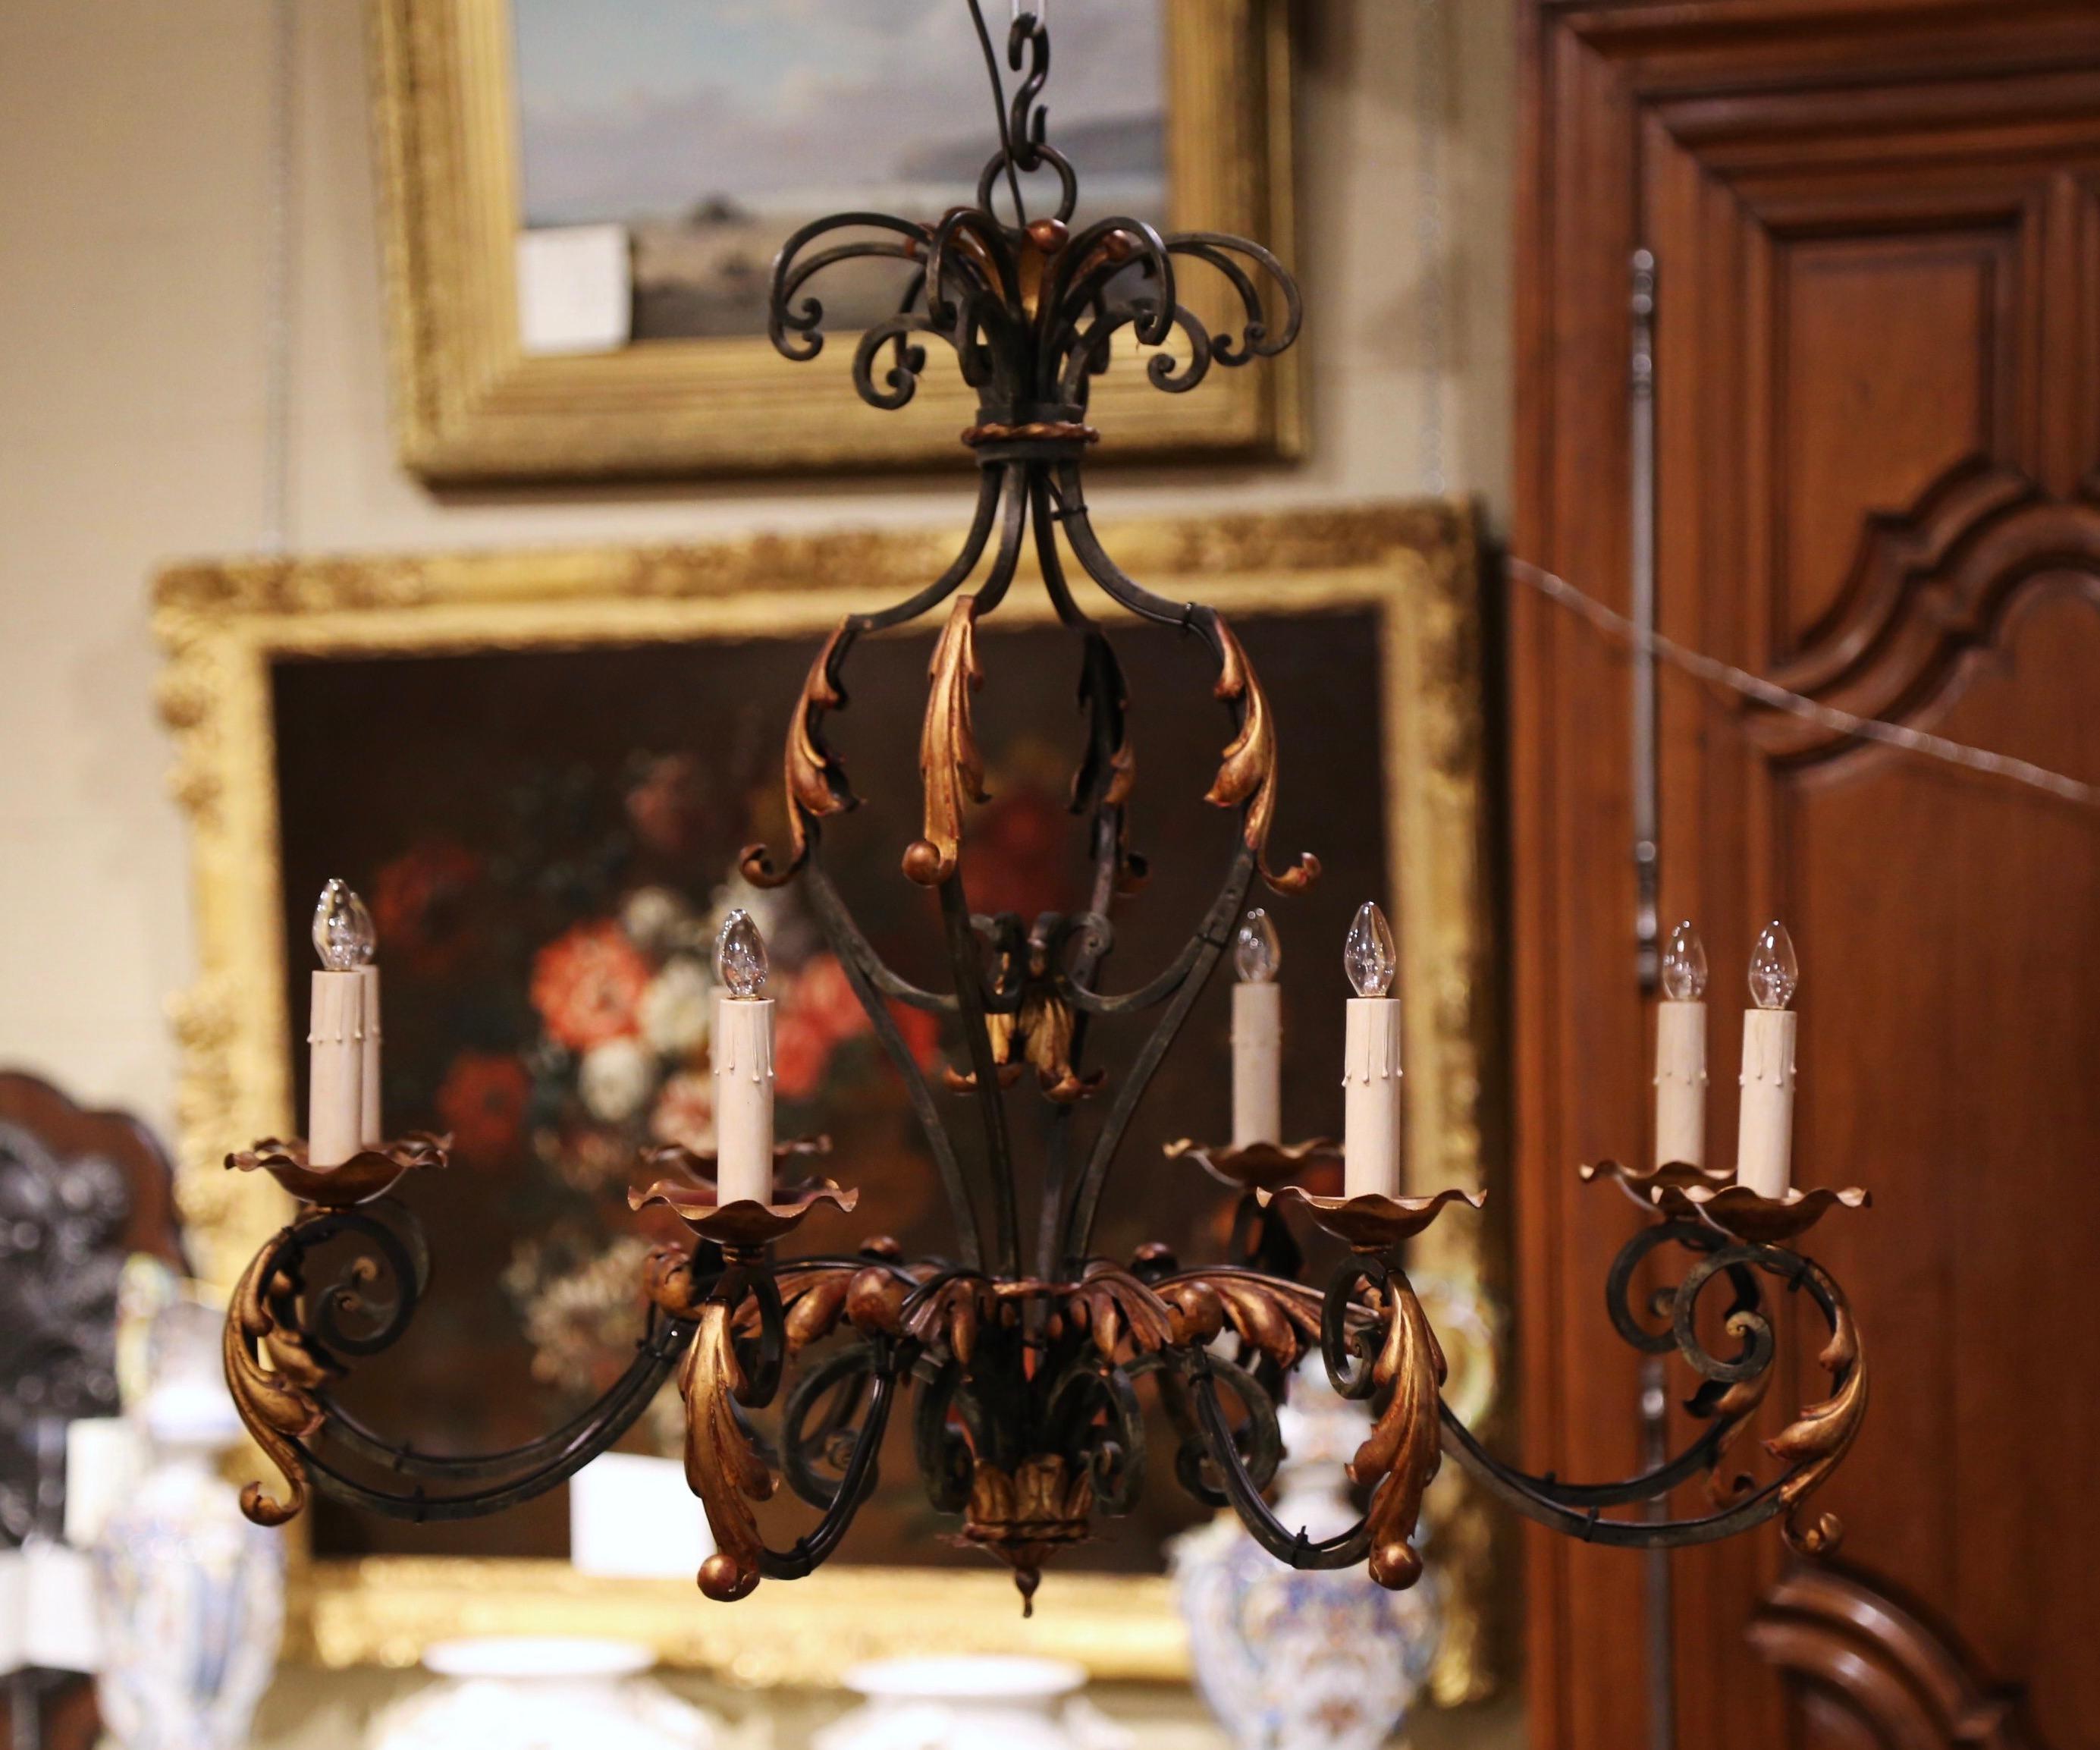 This elegant, antique chandelier was created in Paris, France circa 1920. Round in shape, the Louis XV style iron chandelier features forged scrolled motifs decorated with metal acanthus leaves throughout. The fixture has six arms, and each light is